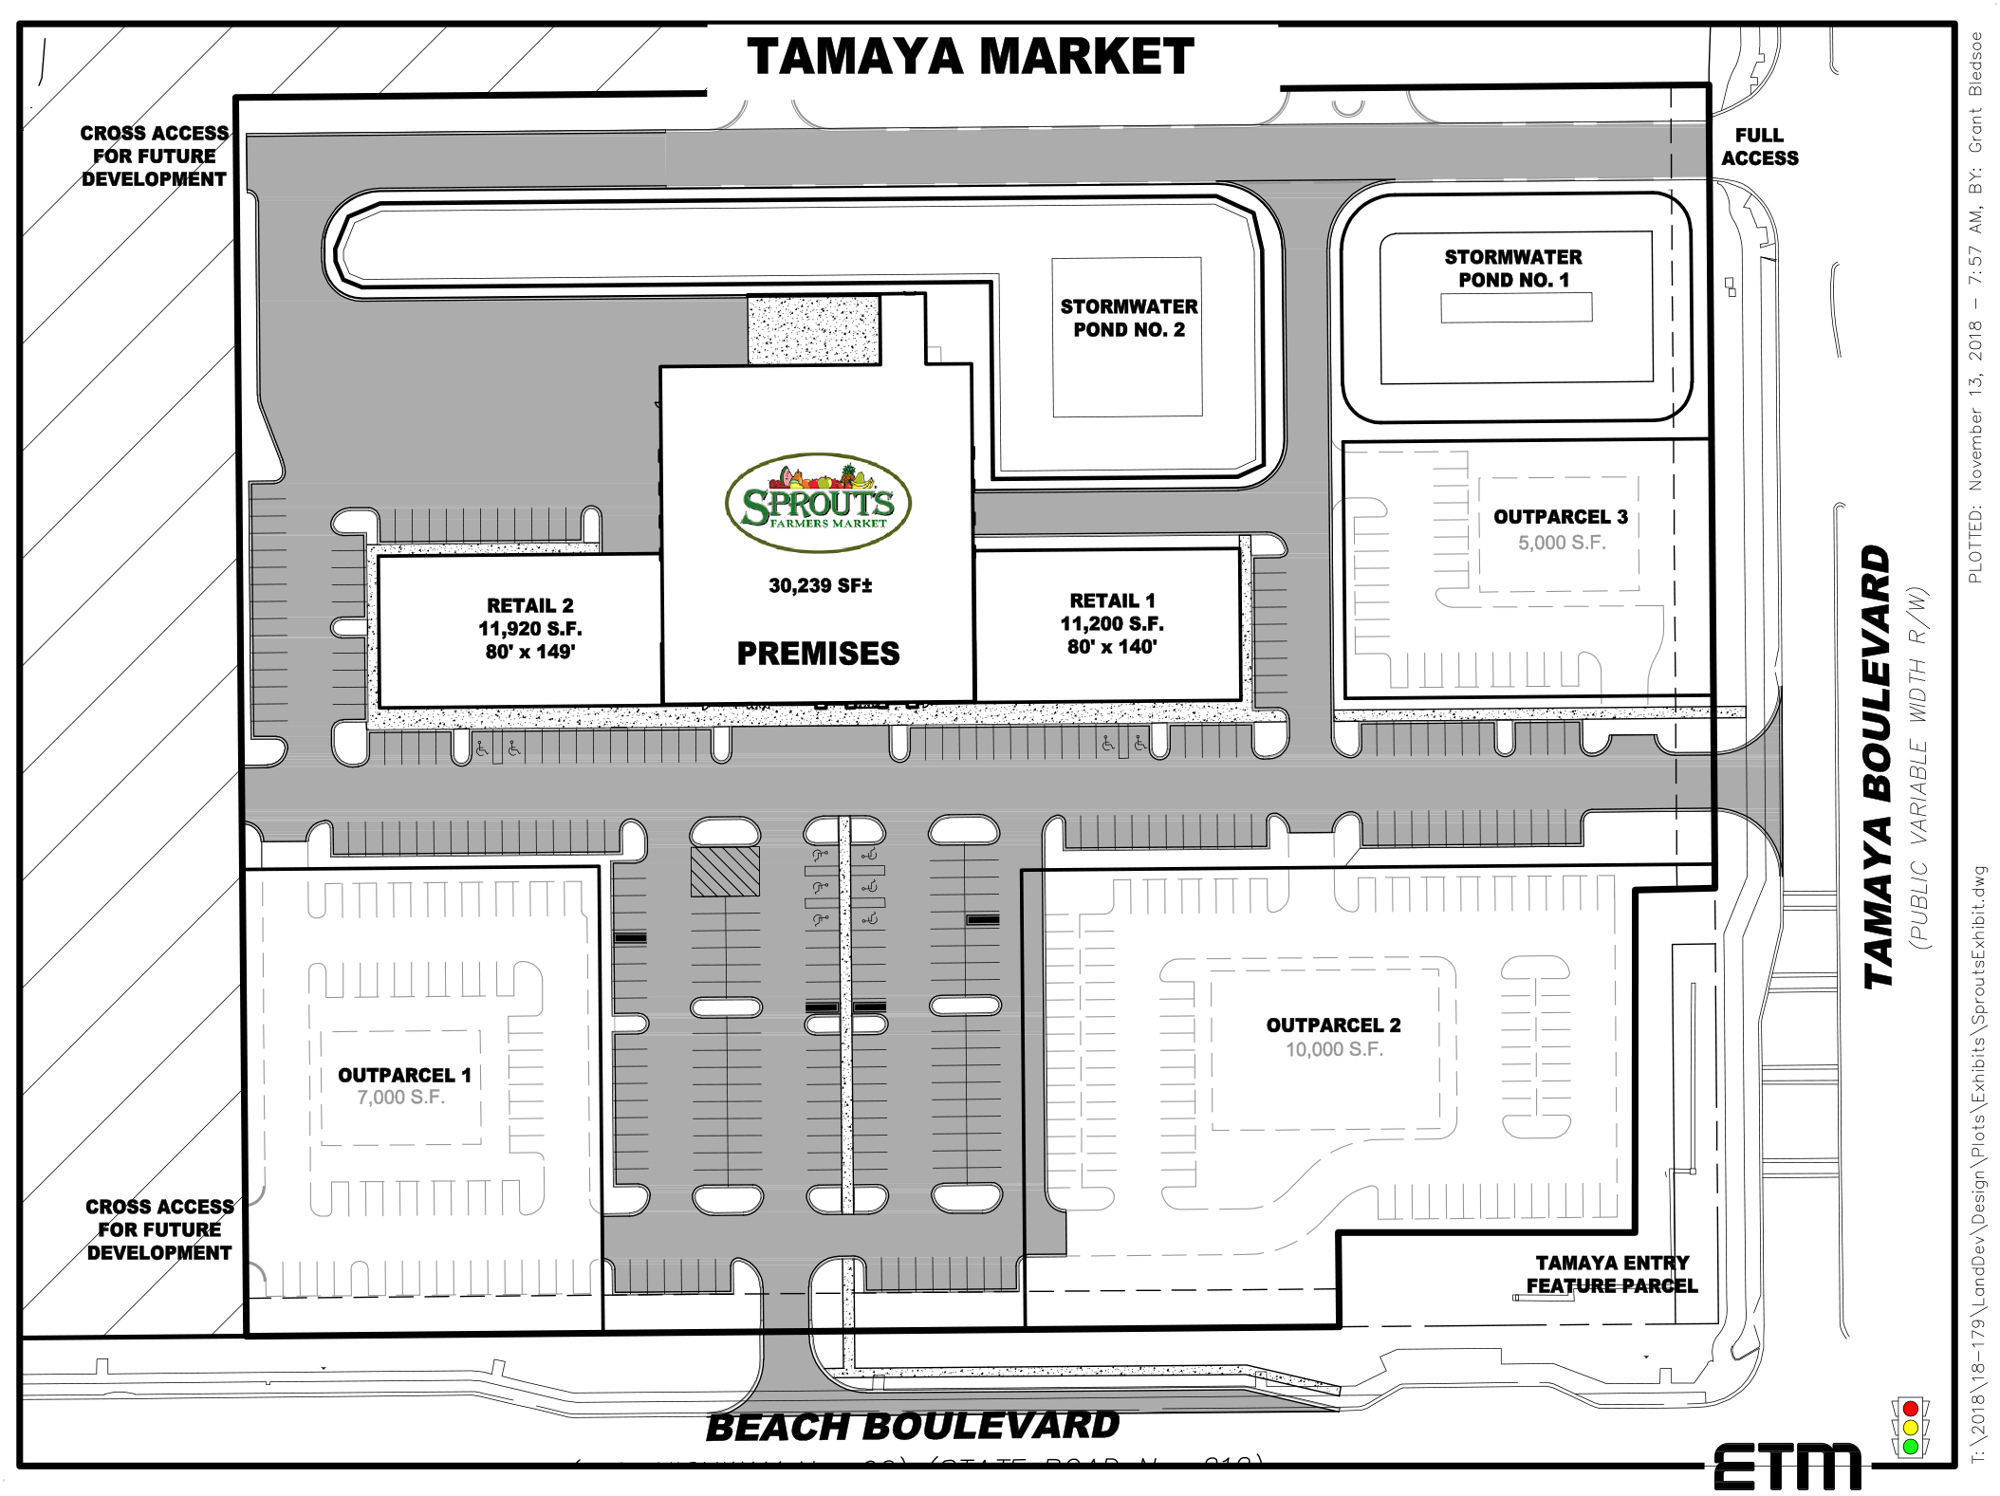 Tamaya Market is designed as a 75,000-square-foot shopping center. Plans show a 30,239-square-foot anchor store with a 12,000-square-foot retail building adjacent to one side and an 11,200-square-foot store to the other.